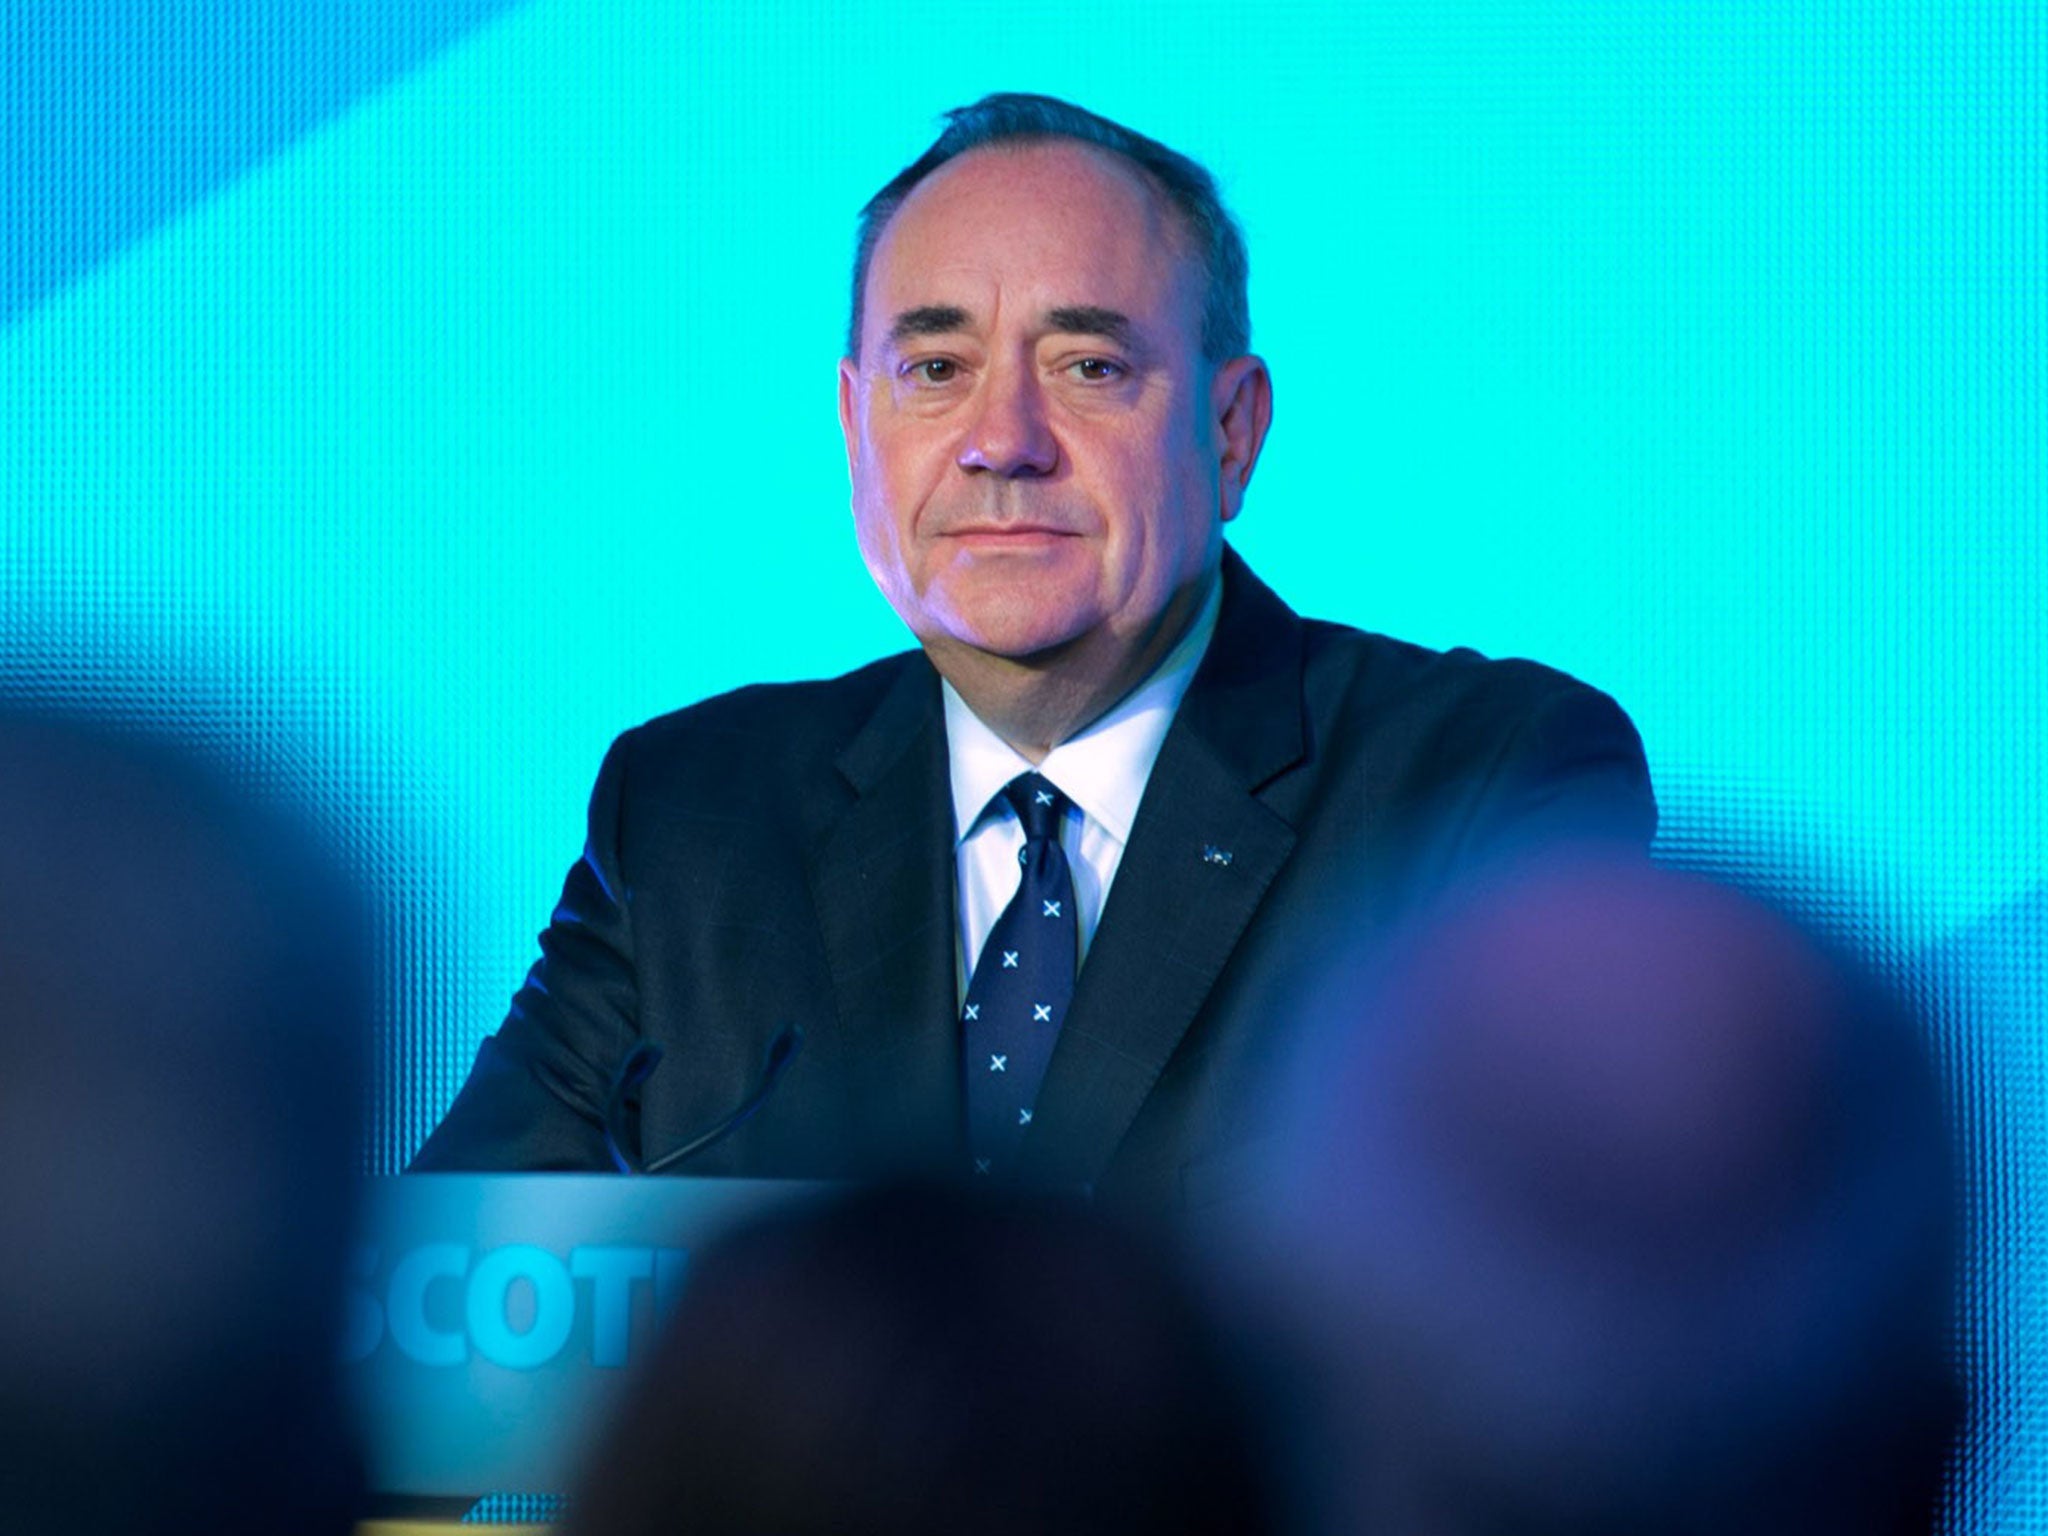 Alex Salmond’s future as the First Minister of the Scottish National Party (SNP) could be cast in doubts after Scotland rejected independence in Thursday’s referendum